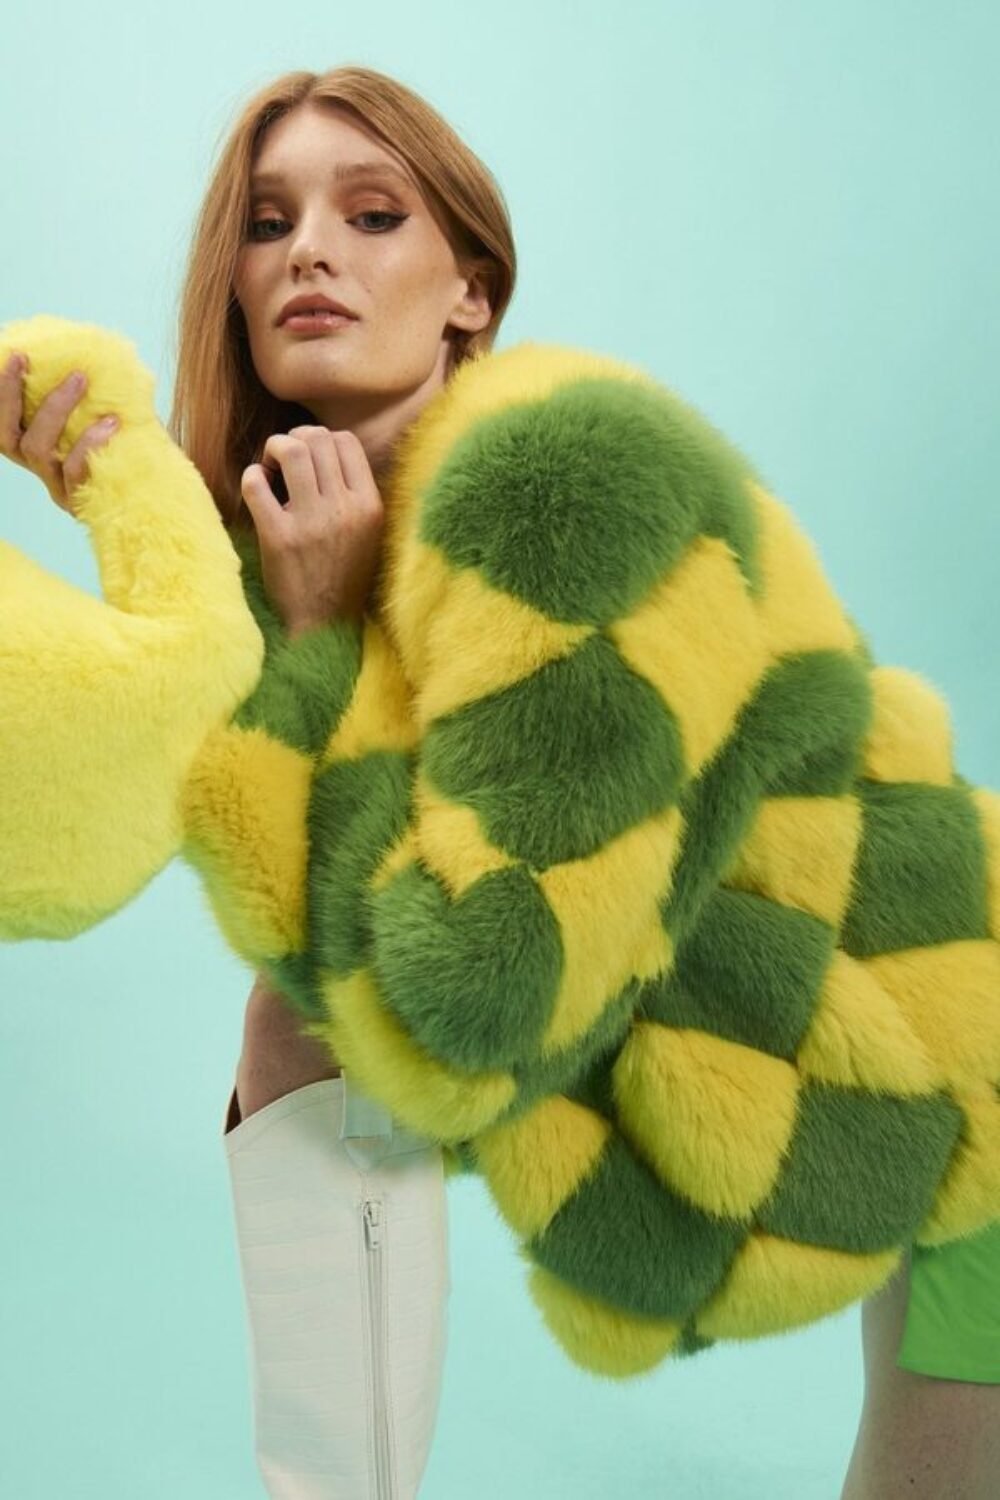 Shop Lux Yellow and Green Delilah Diamond Faux Fur Coat and women's luxury and designer clothes at www.lux-apparel.co.uk